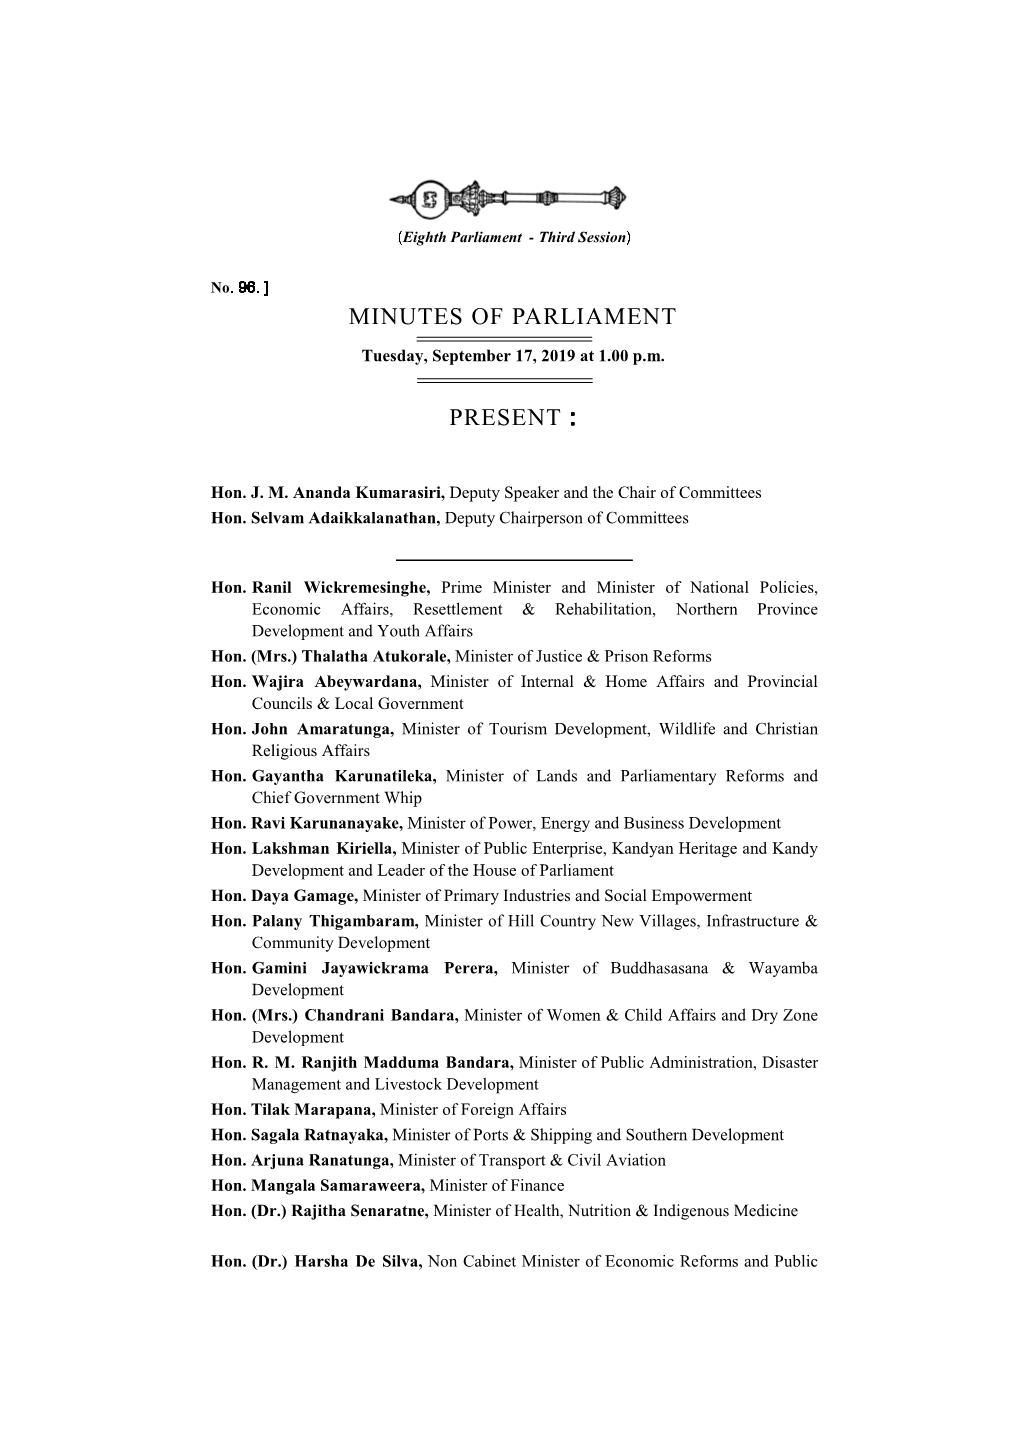 Minutes of Parliament for 17.09.2019